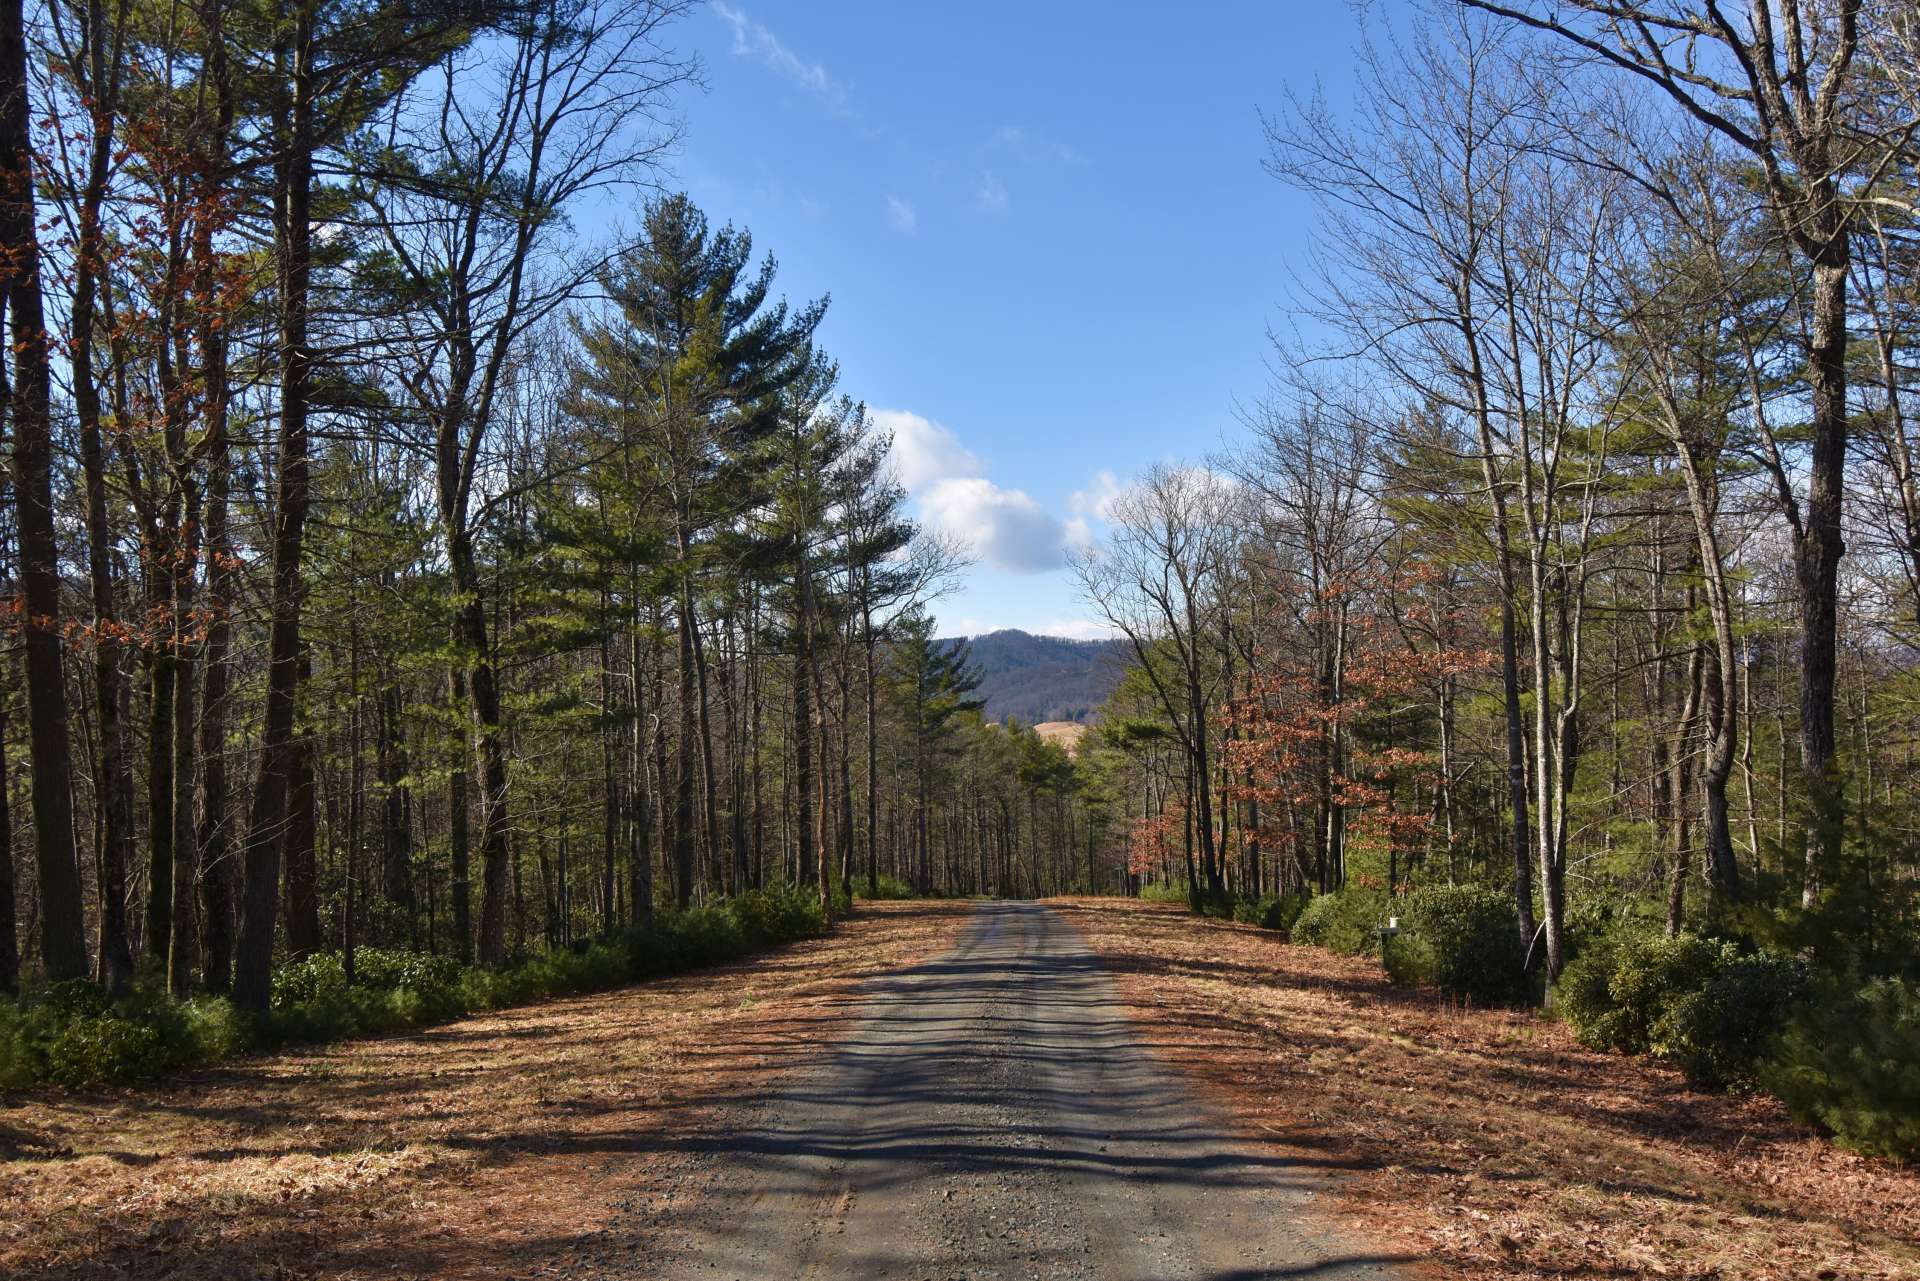 Welcome to The Glen at Calloway Gap!  The Glen @ Calloway Gap  is a small subdivision with wide roads, underground electrical service to the lots, and lots that lay well and are blanketed with hardwoods, Mountain Laurel, and Rhododendron.